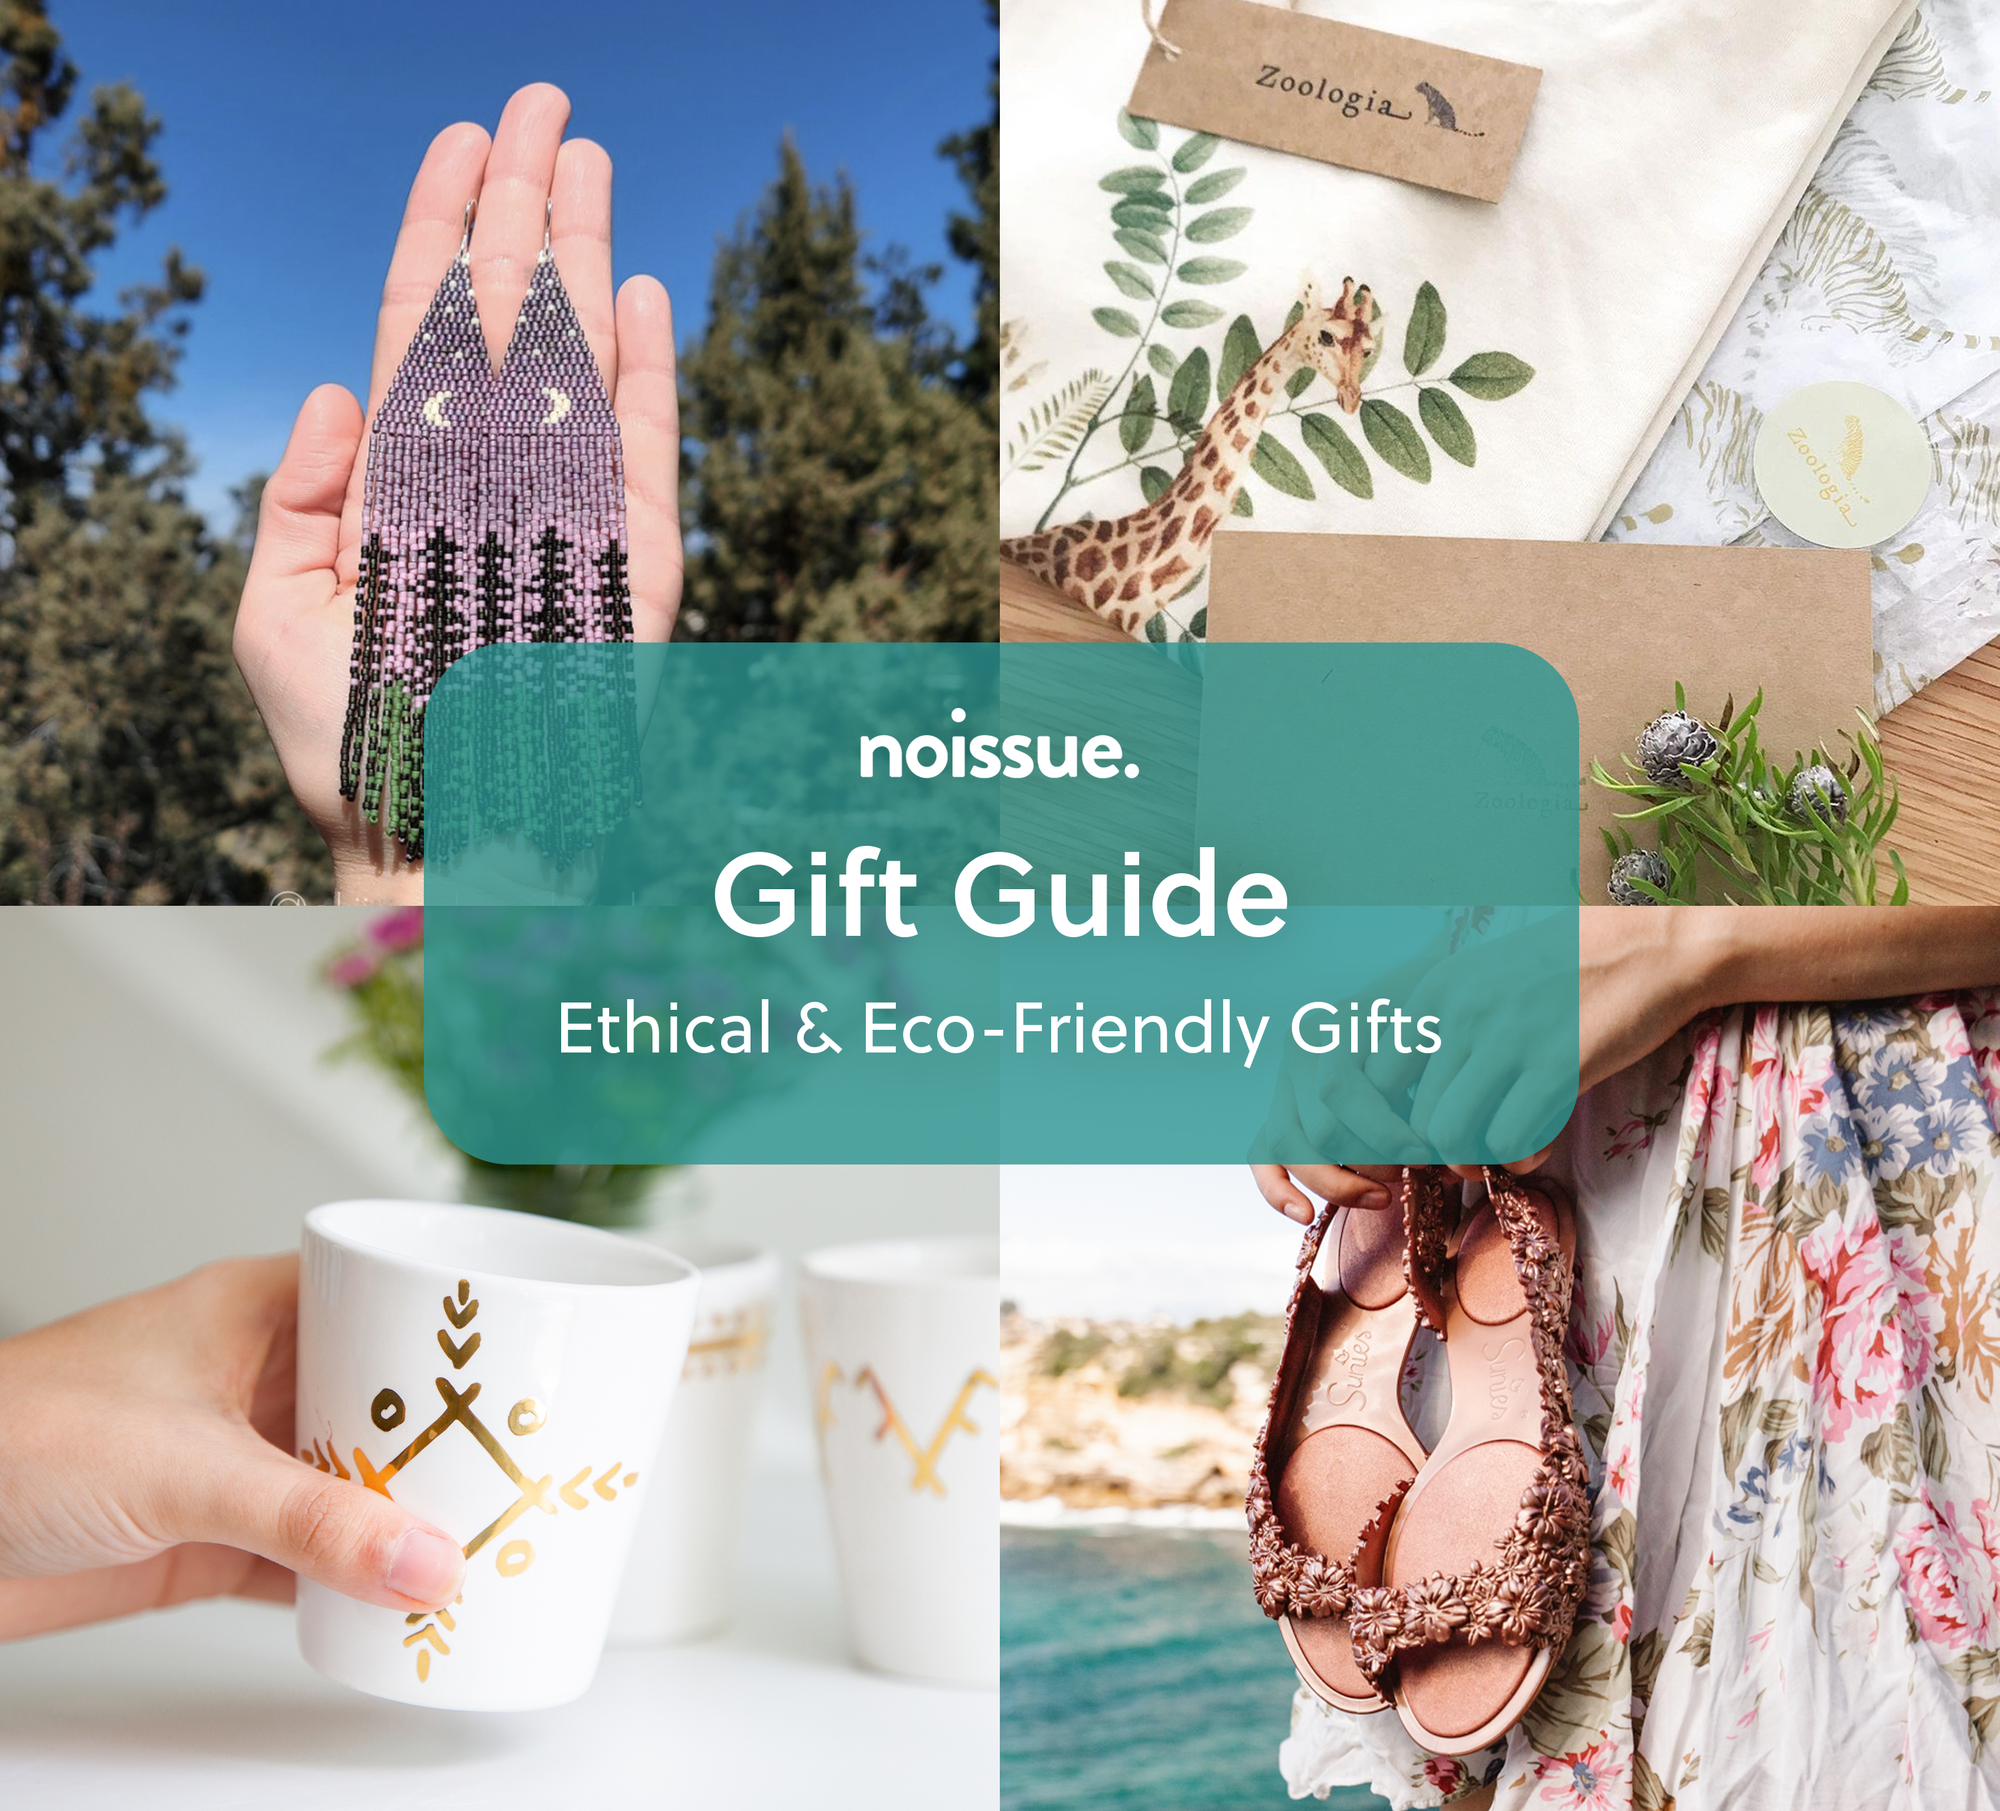 8 Ethical and Earth-Friendly Gifts That’ll Keep On Giving This Holiday Season